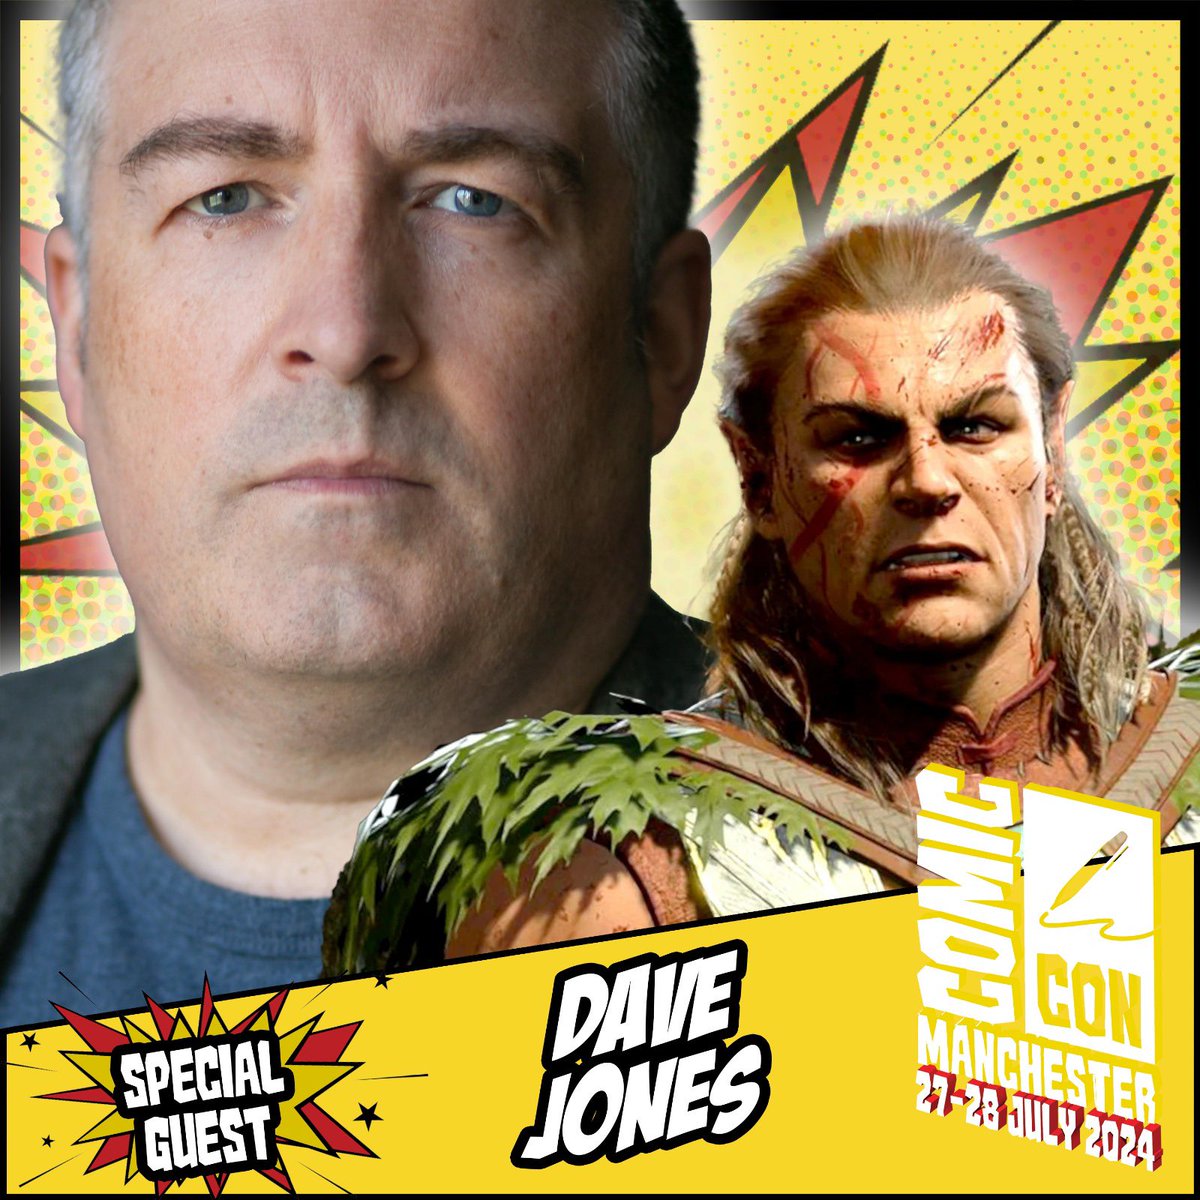 Comic Convention Manchester welcomes Dave Jones, known for projects such as Baulders Gates III, Alma’s Not Normal, Wedding Season and many more. Appearing 27-28 July! Tickets: comicconventionmanchester.co.uk